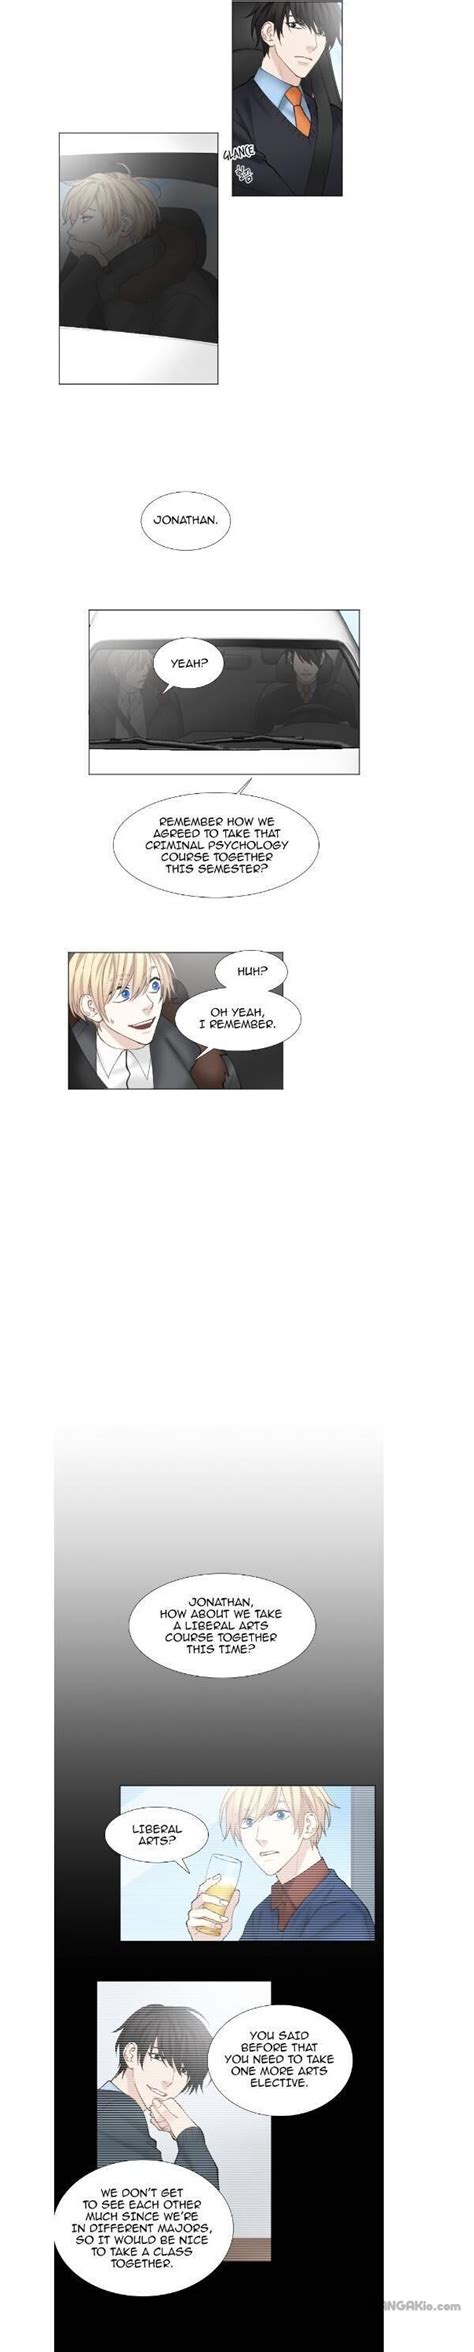 Criminal Interview Chapter 15 Chapter Pawmanga